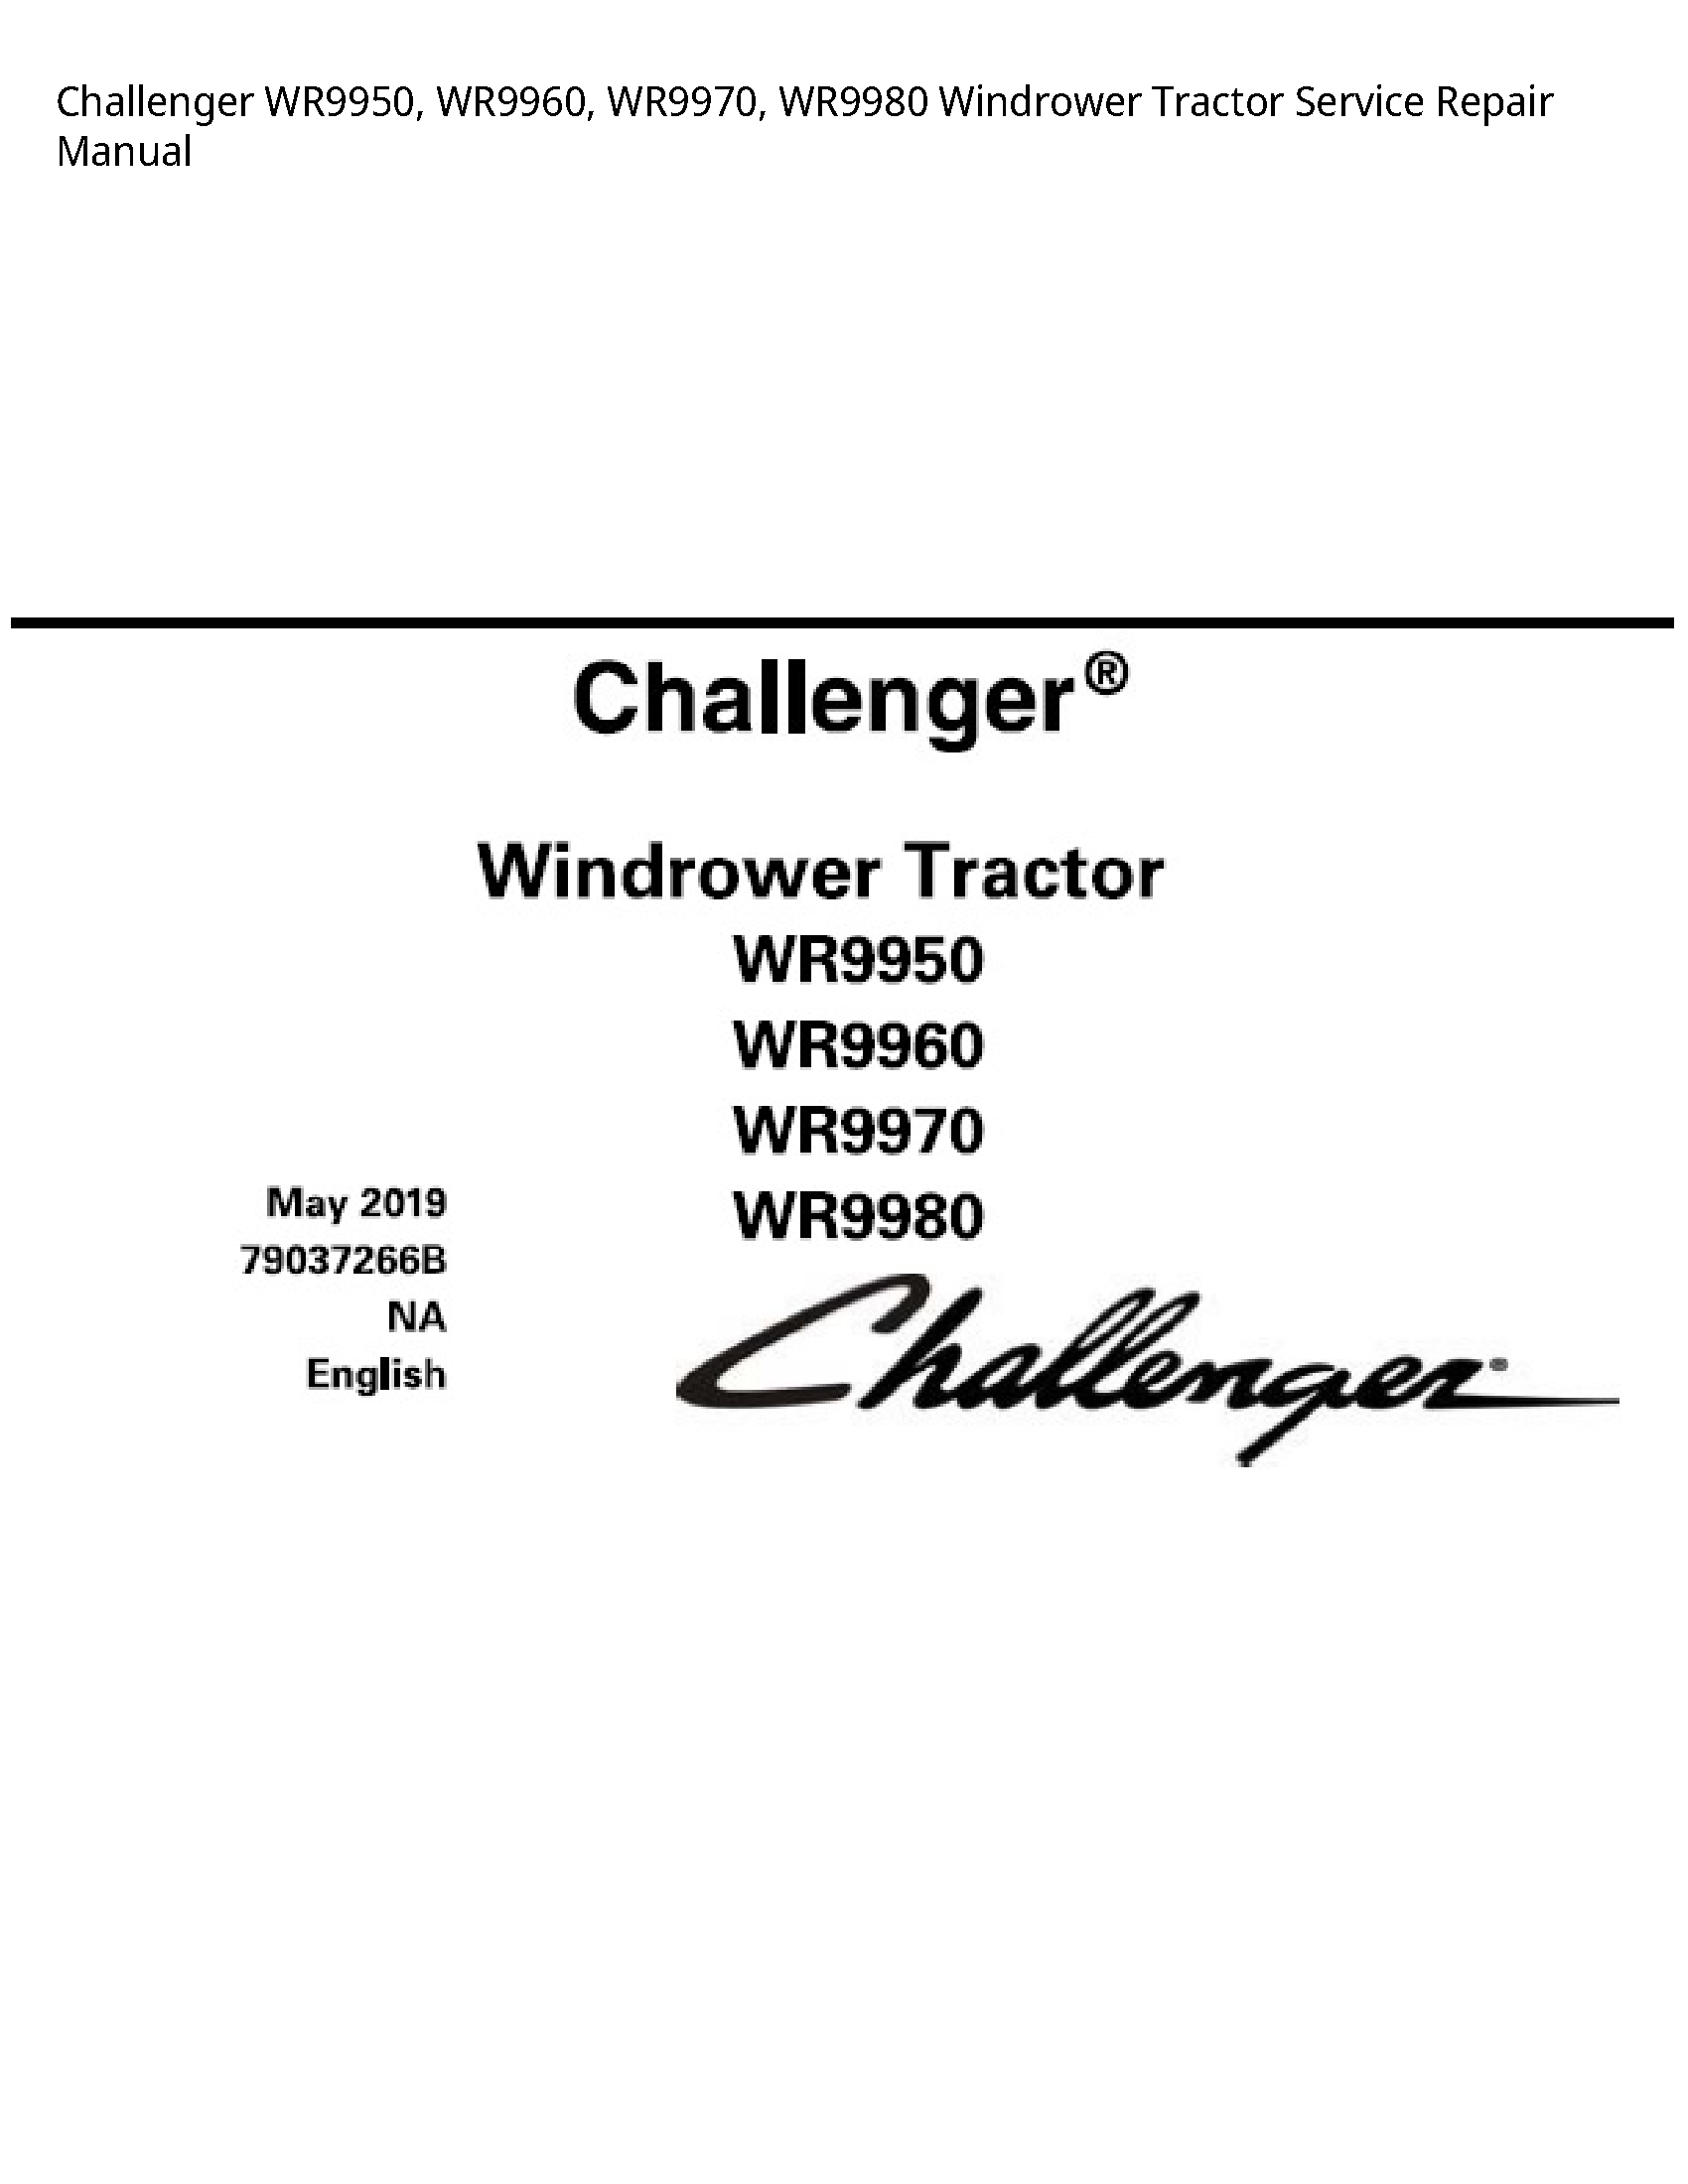 Challenger WR9950 Windrower Tractor manual